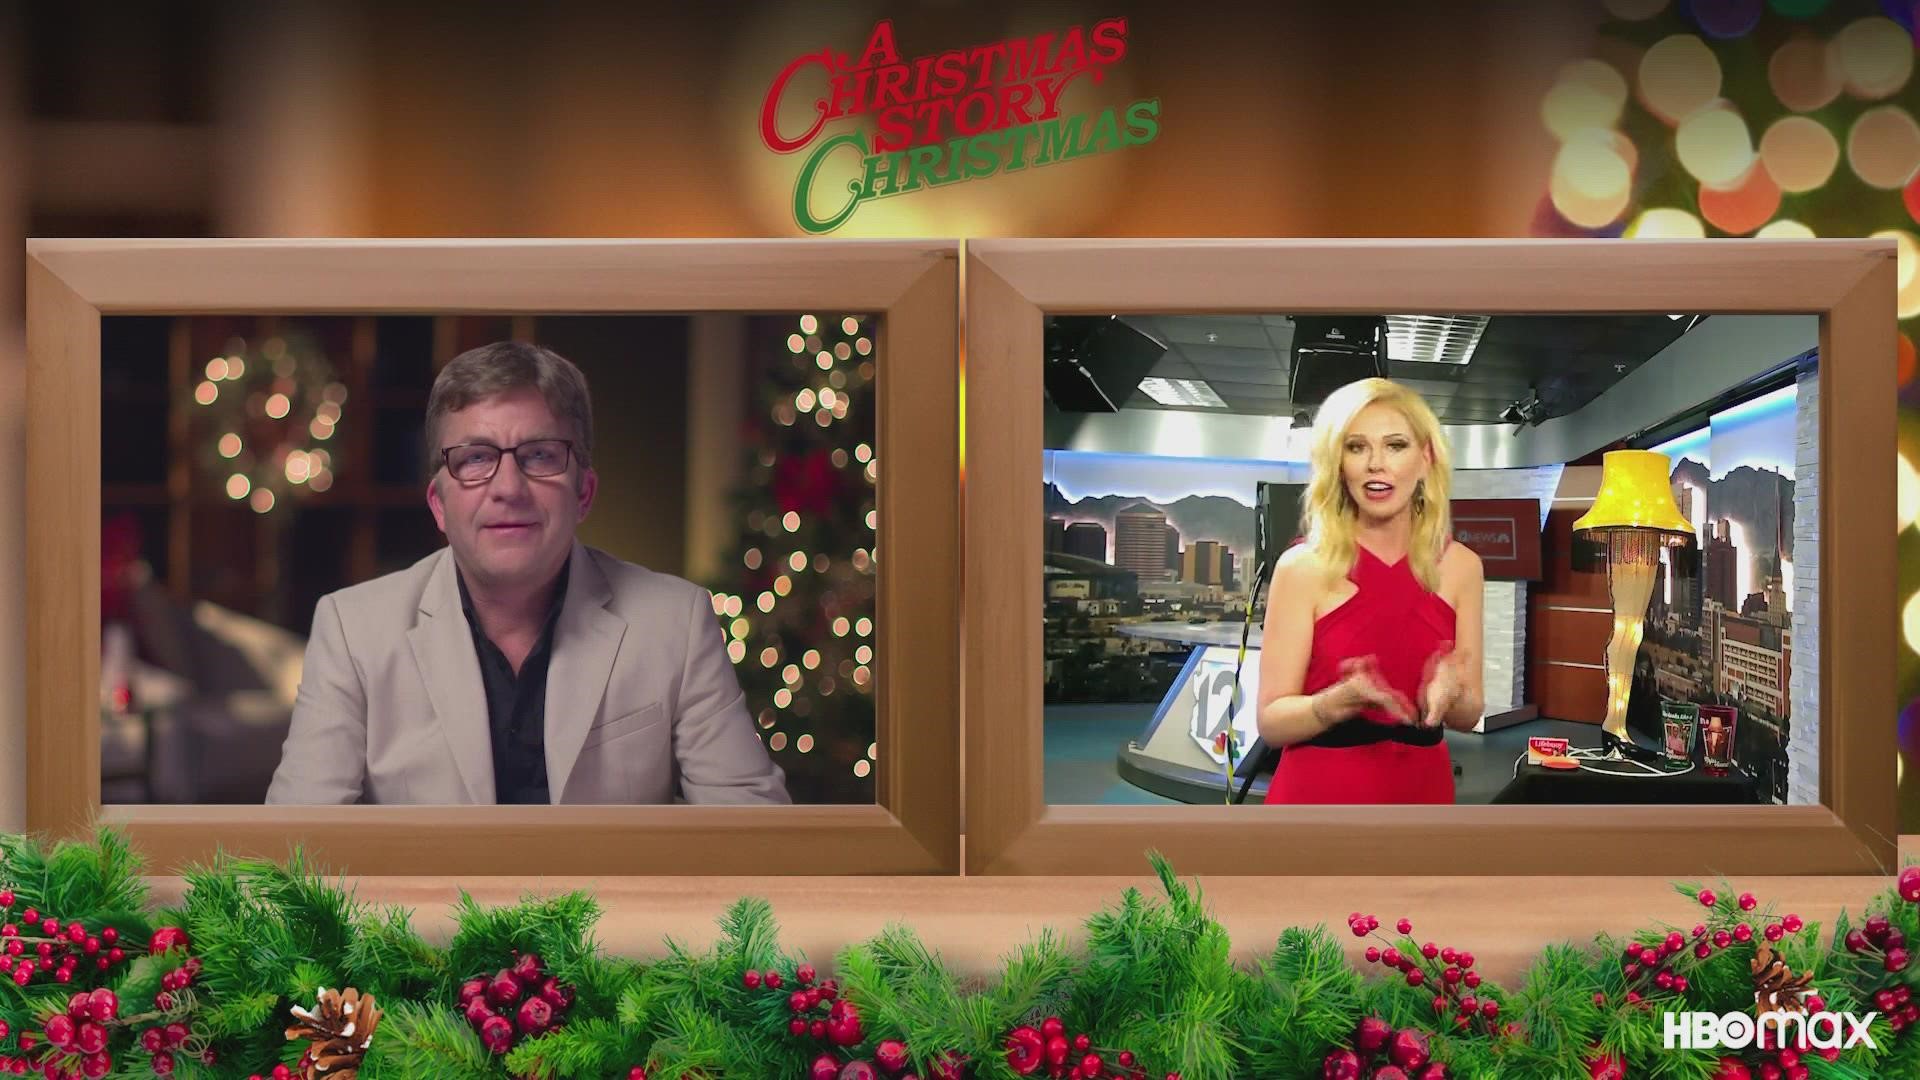 Krystle Henderson chats with Peter Billingsley, the star of "A Christmas Story Christmas." He talks about the sequel to the Christmas classic and his Arizona ties.